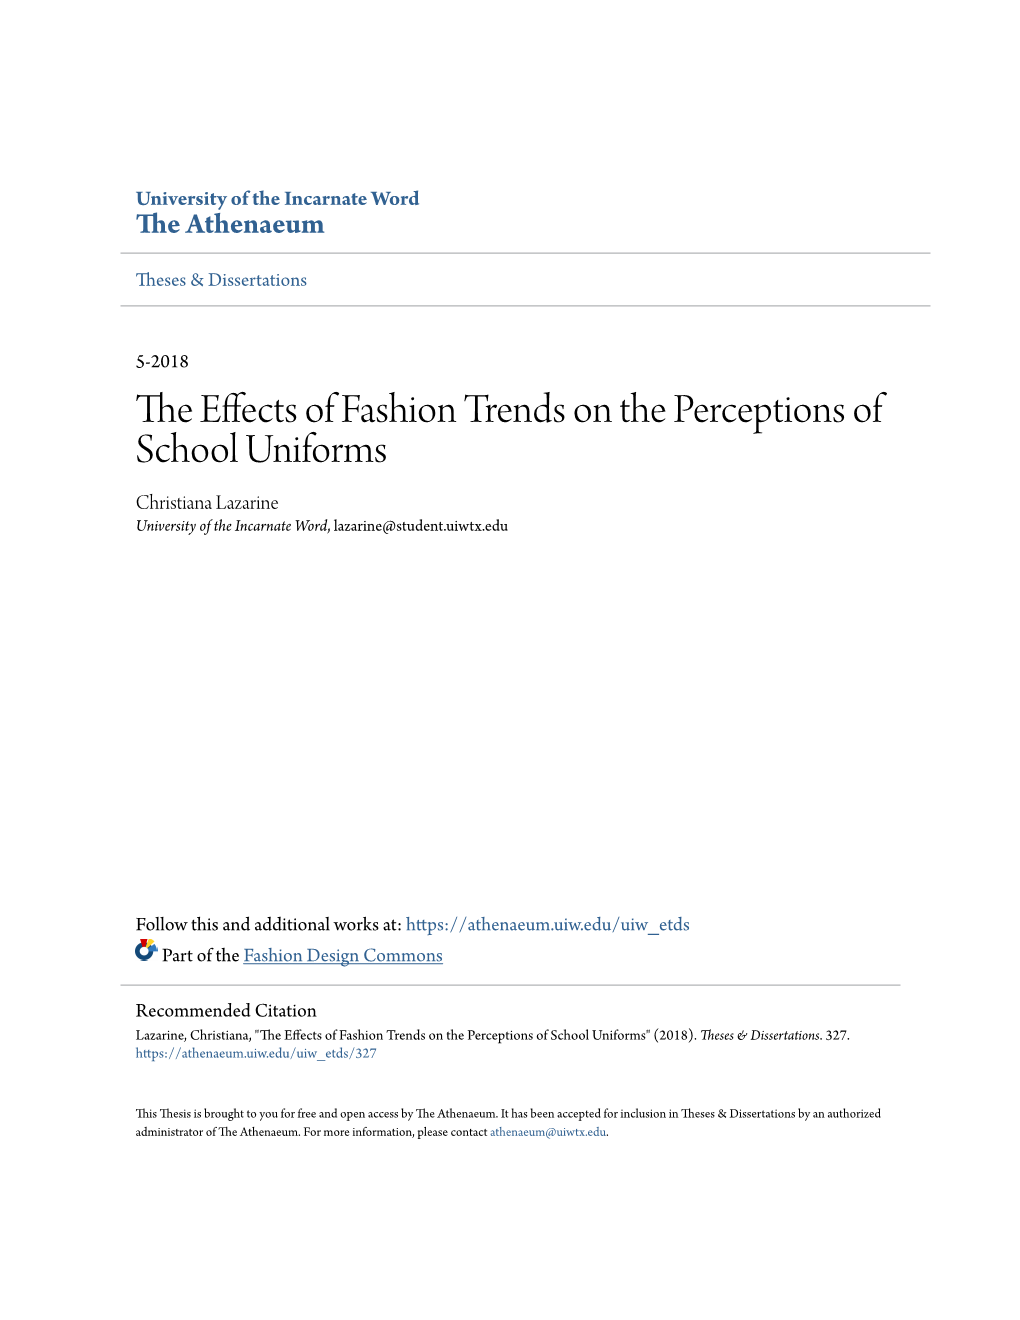 The Effects of Fashion Trends on the Perceptions of School Uniforms" (2018)